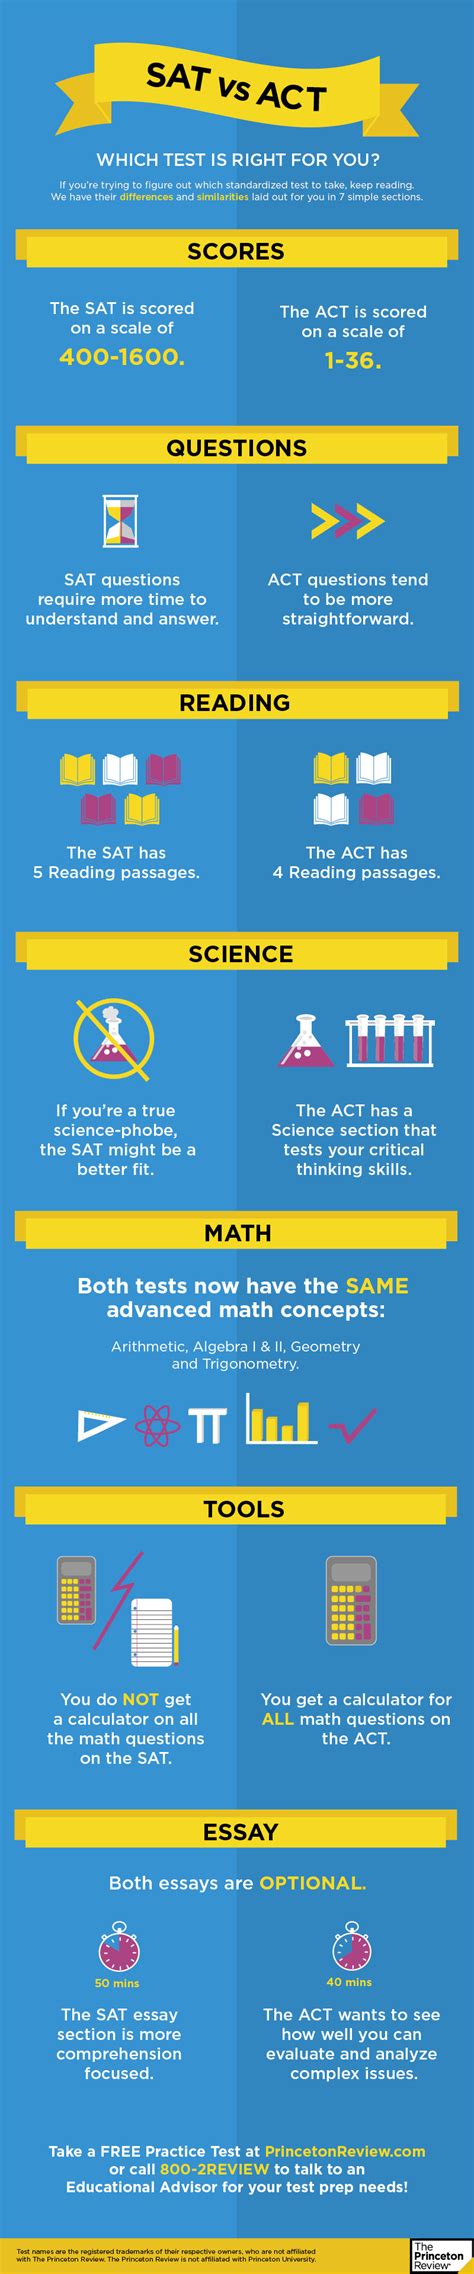 Sat Vs Act Infographic The Princeton Review